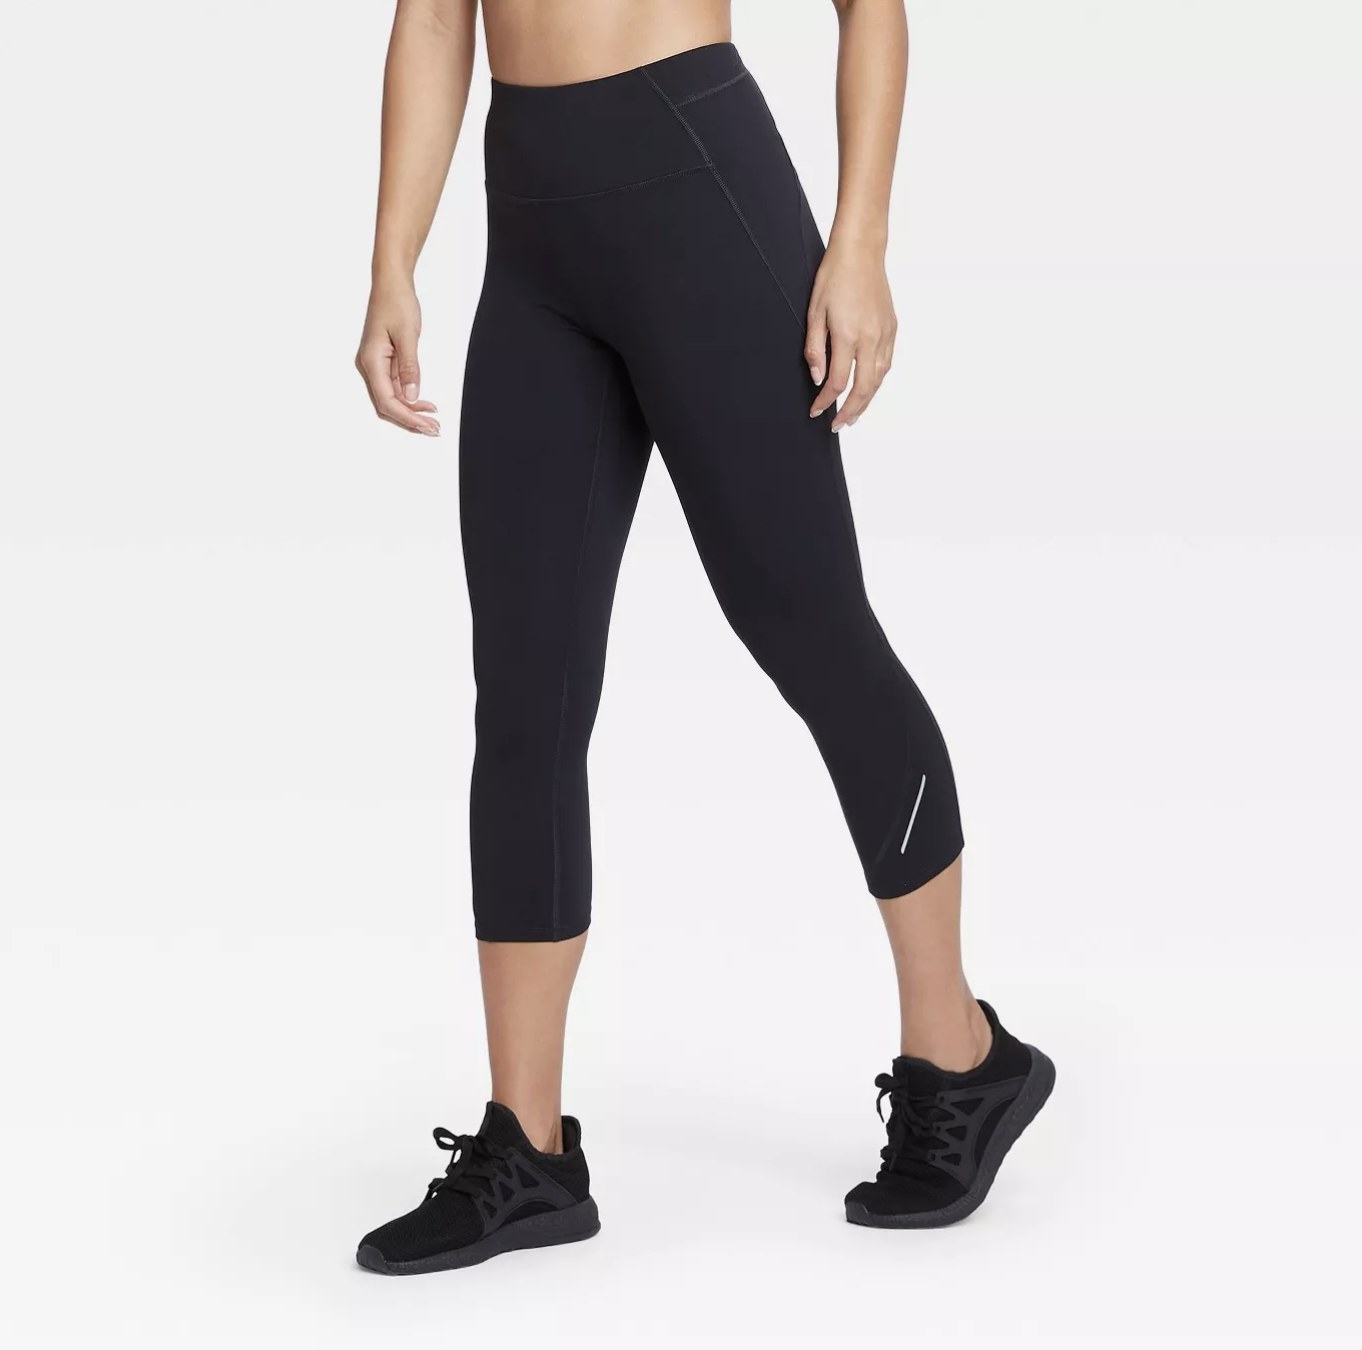 A model wearing a pair of black leggings that hit at the calf